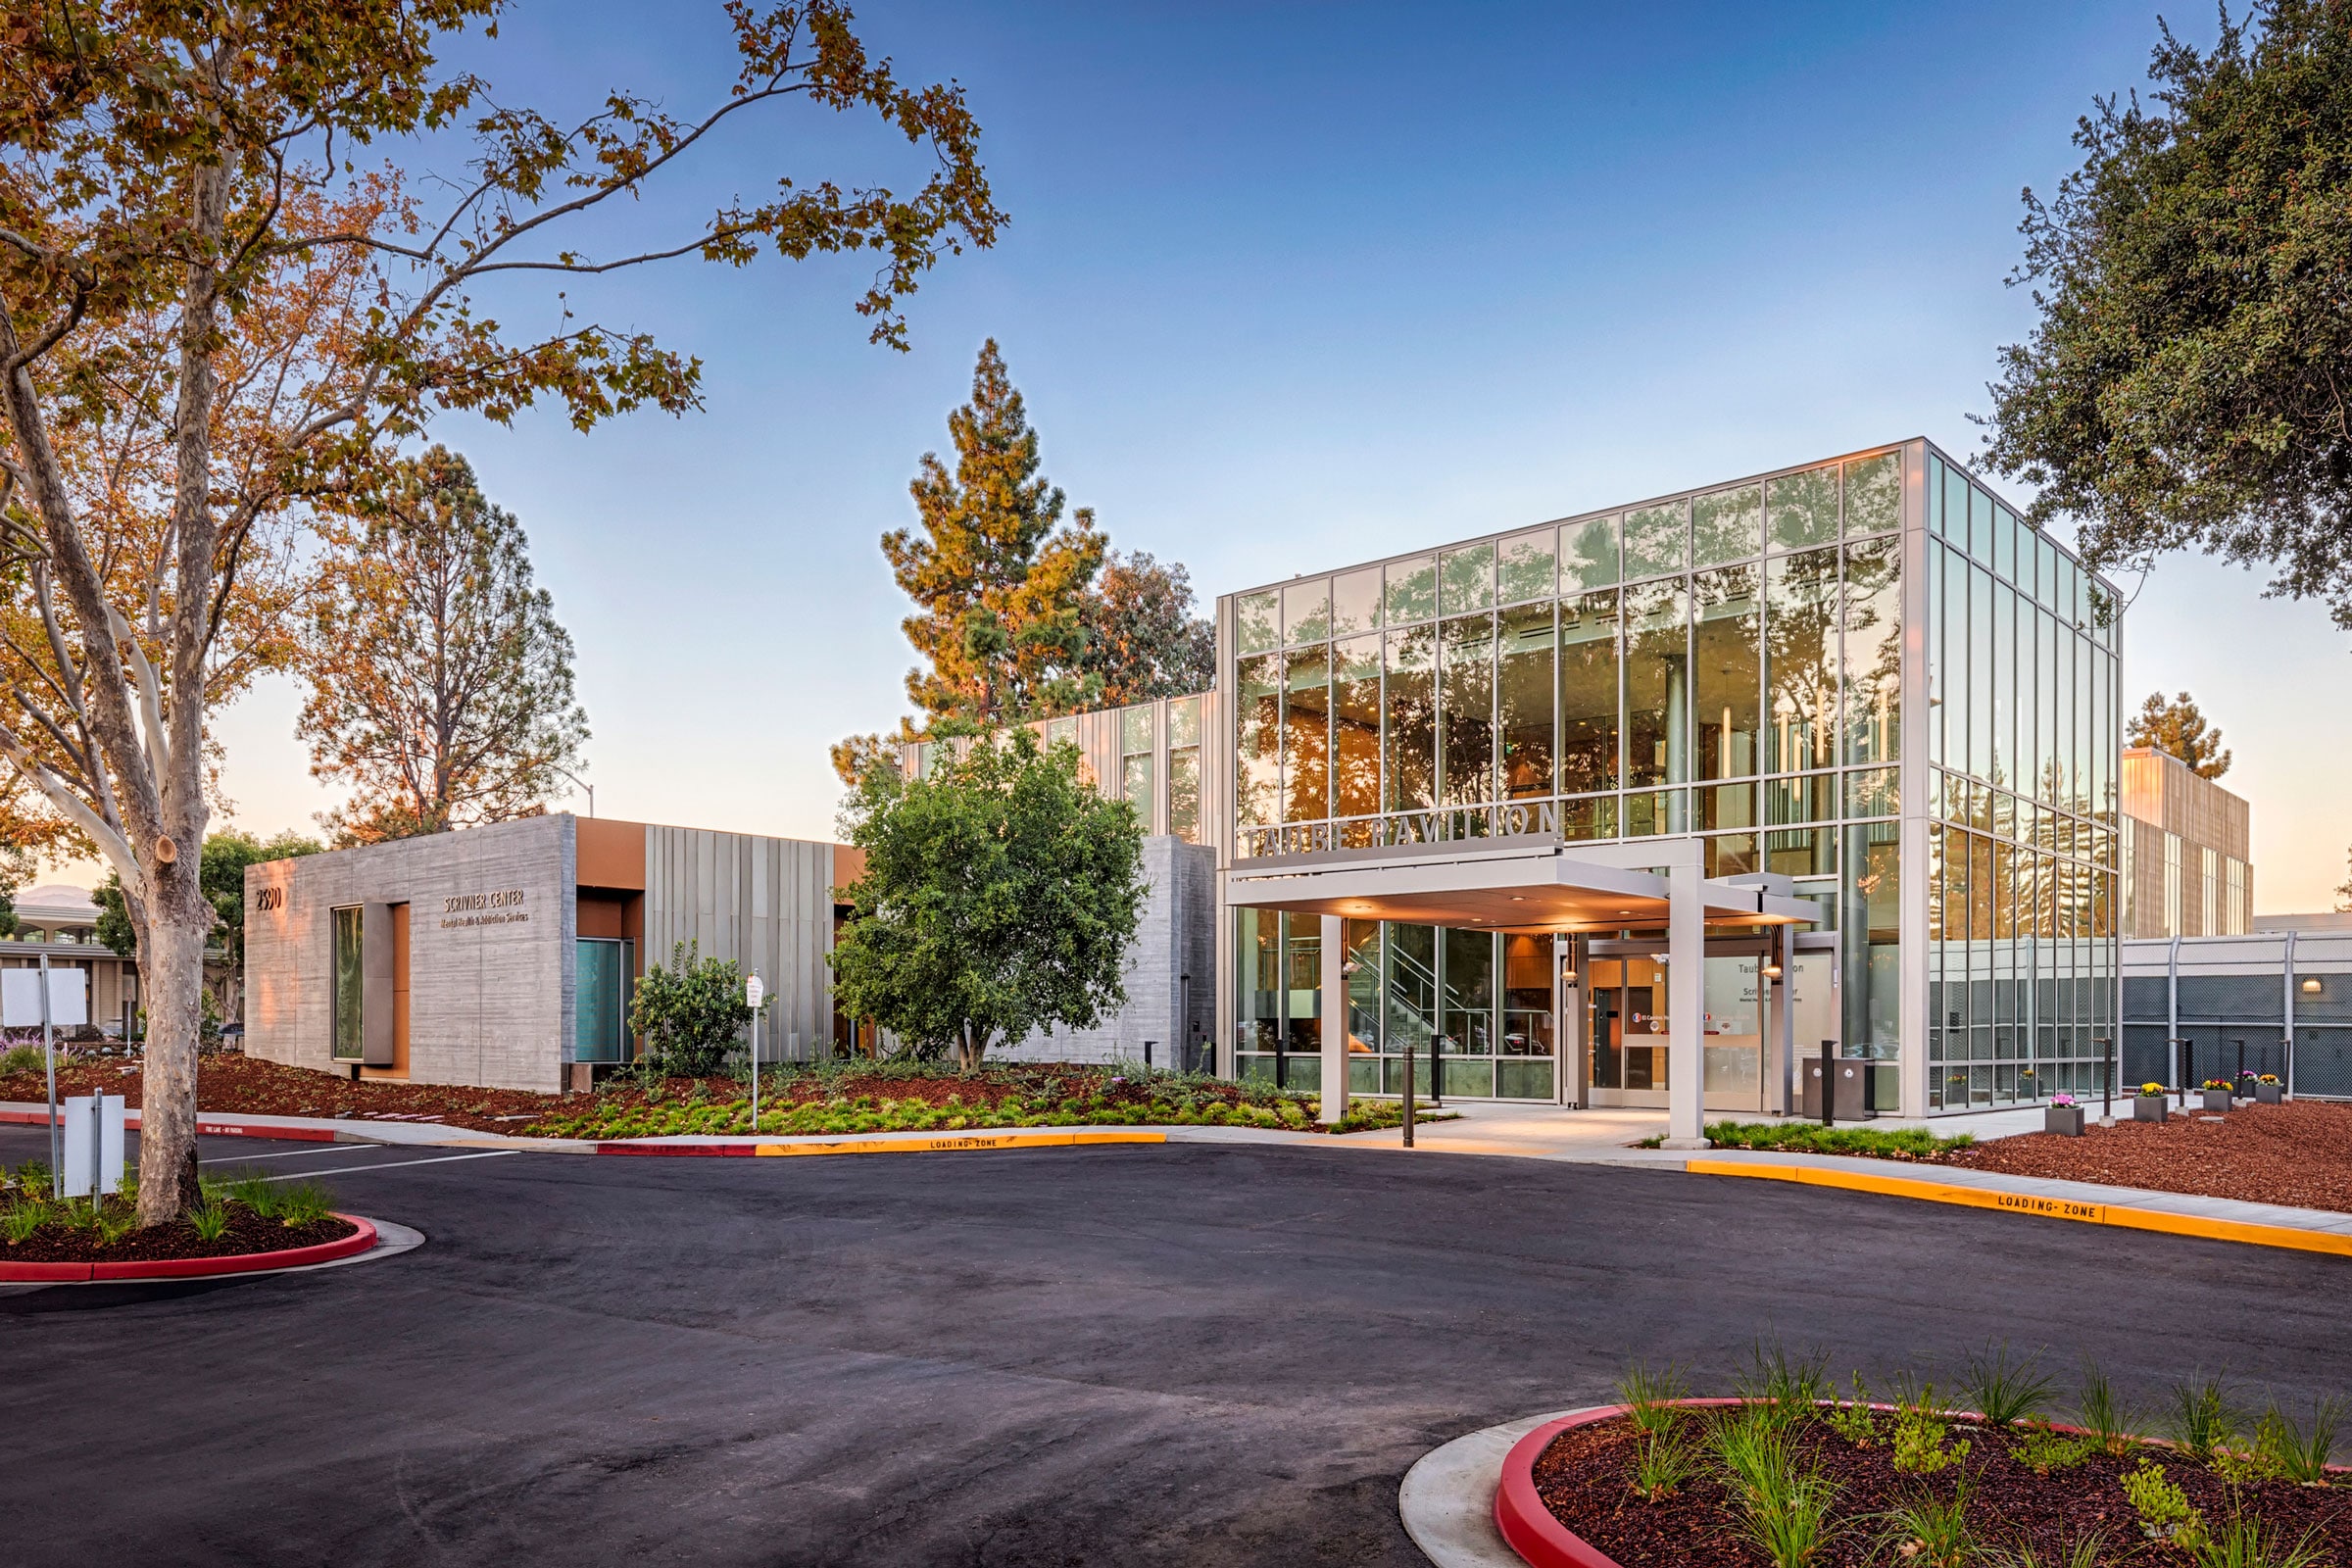 Design for Wellness Defies Stereotypes at This Behavioral Health Facility